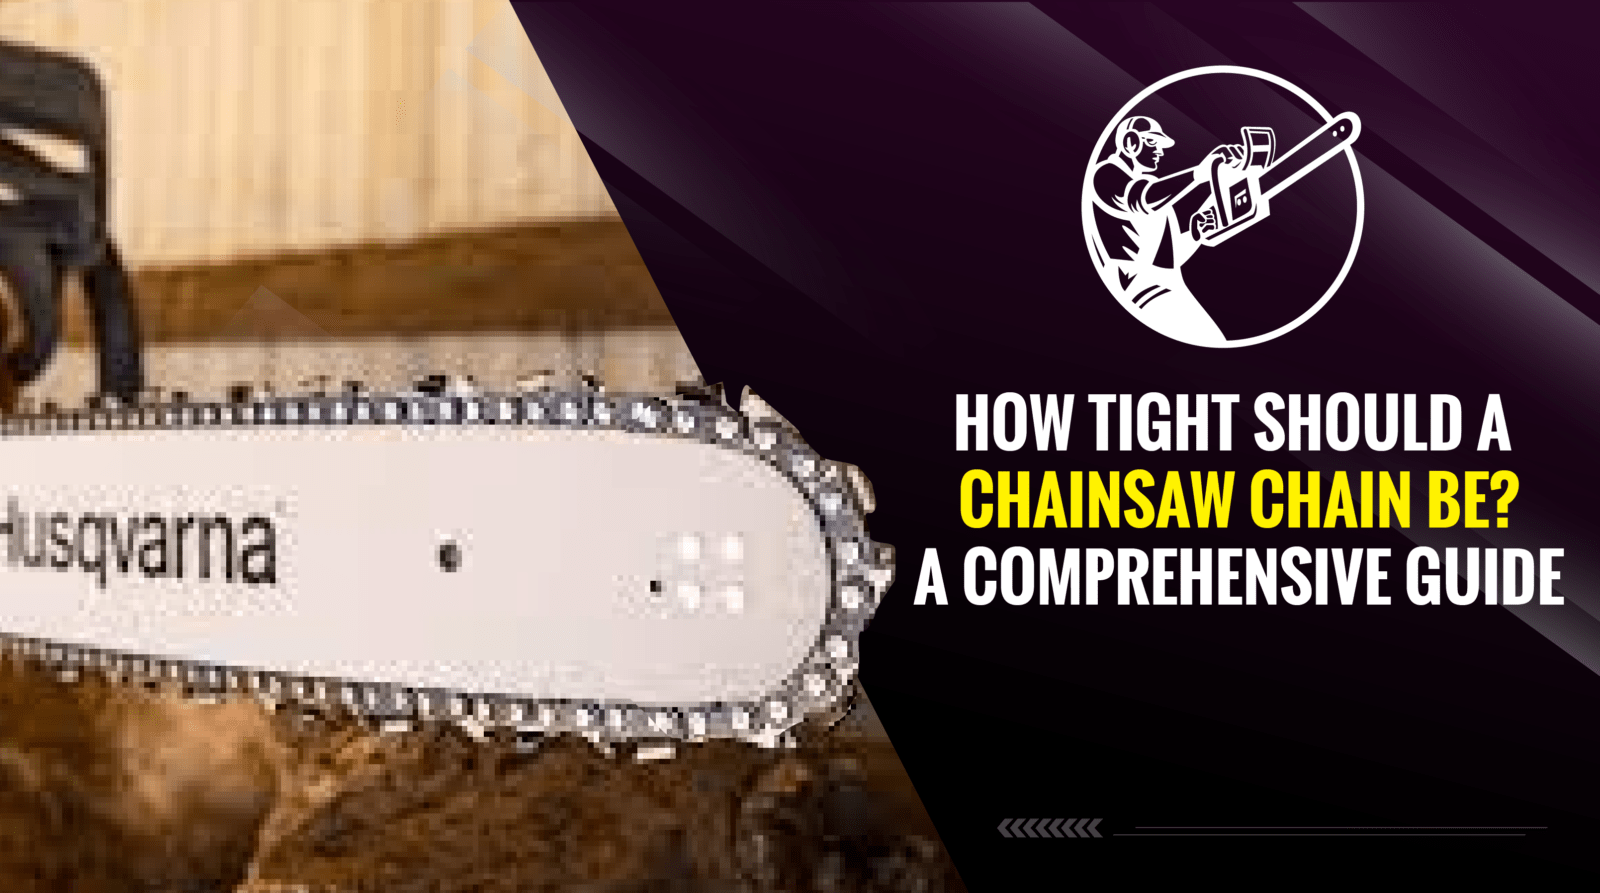 How Tight Should a Chainsaw Chain Be? A Comprehensive Guide